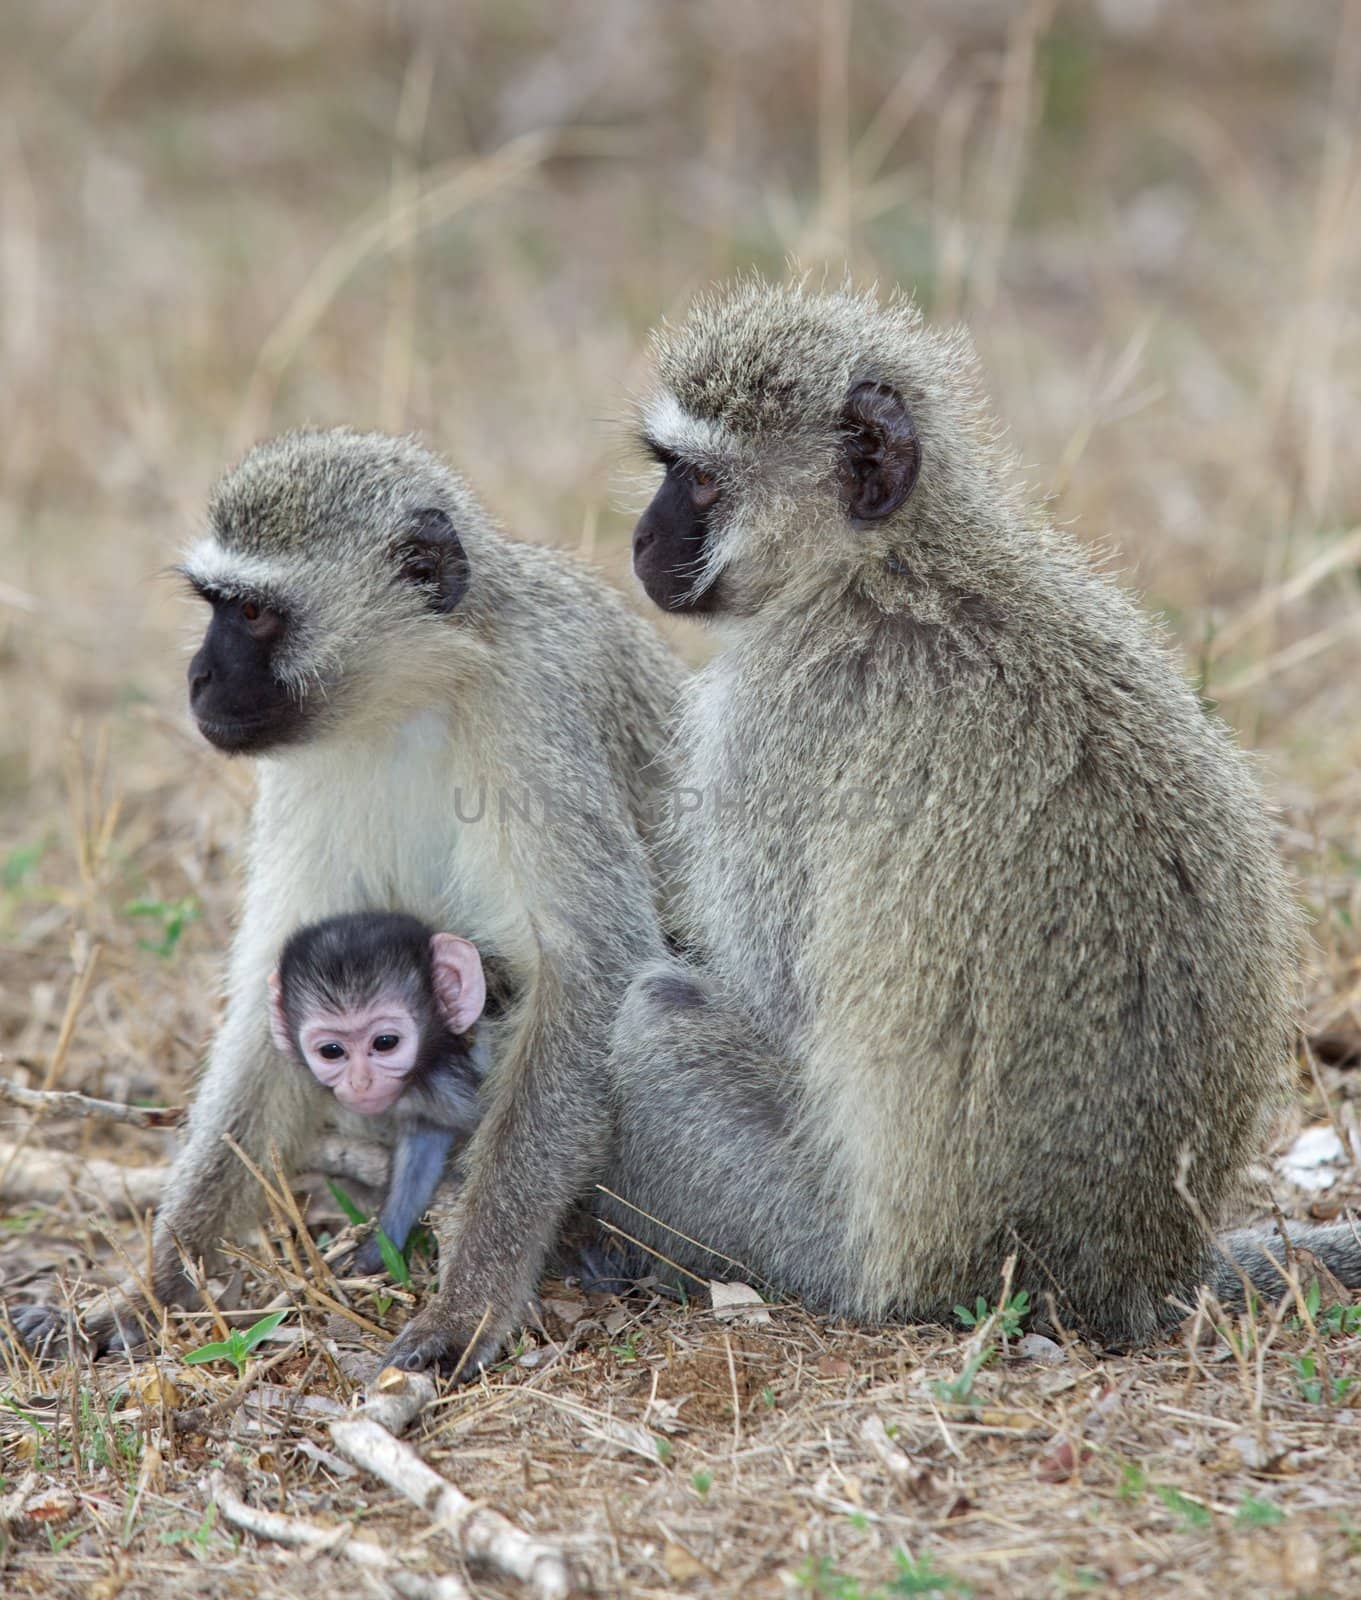 Vervet (Green) monkeys (Cercopithecus aethiops) with a baby in the Kruger National Park.